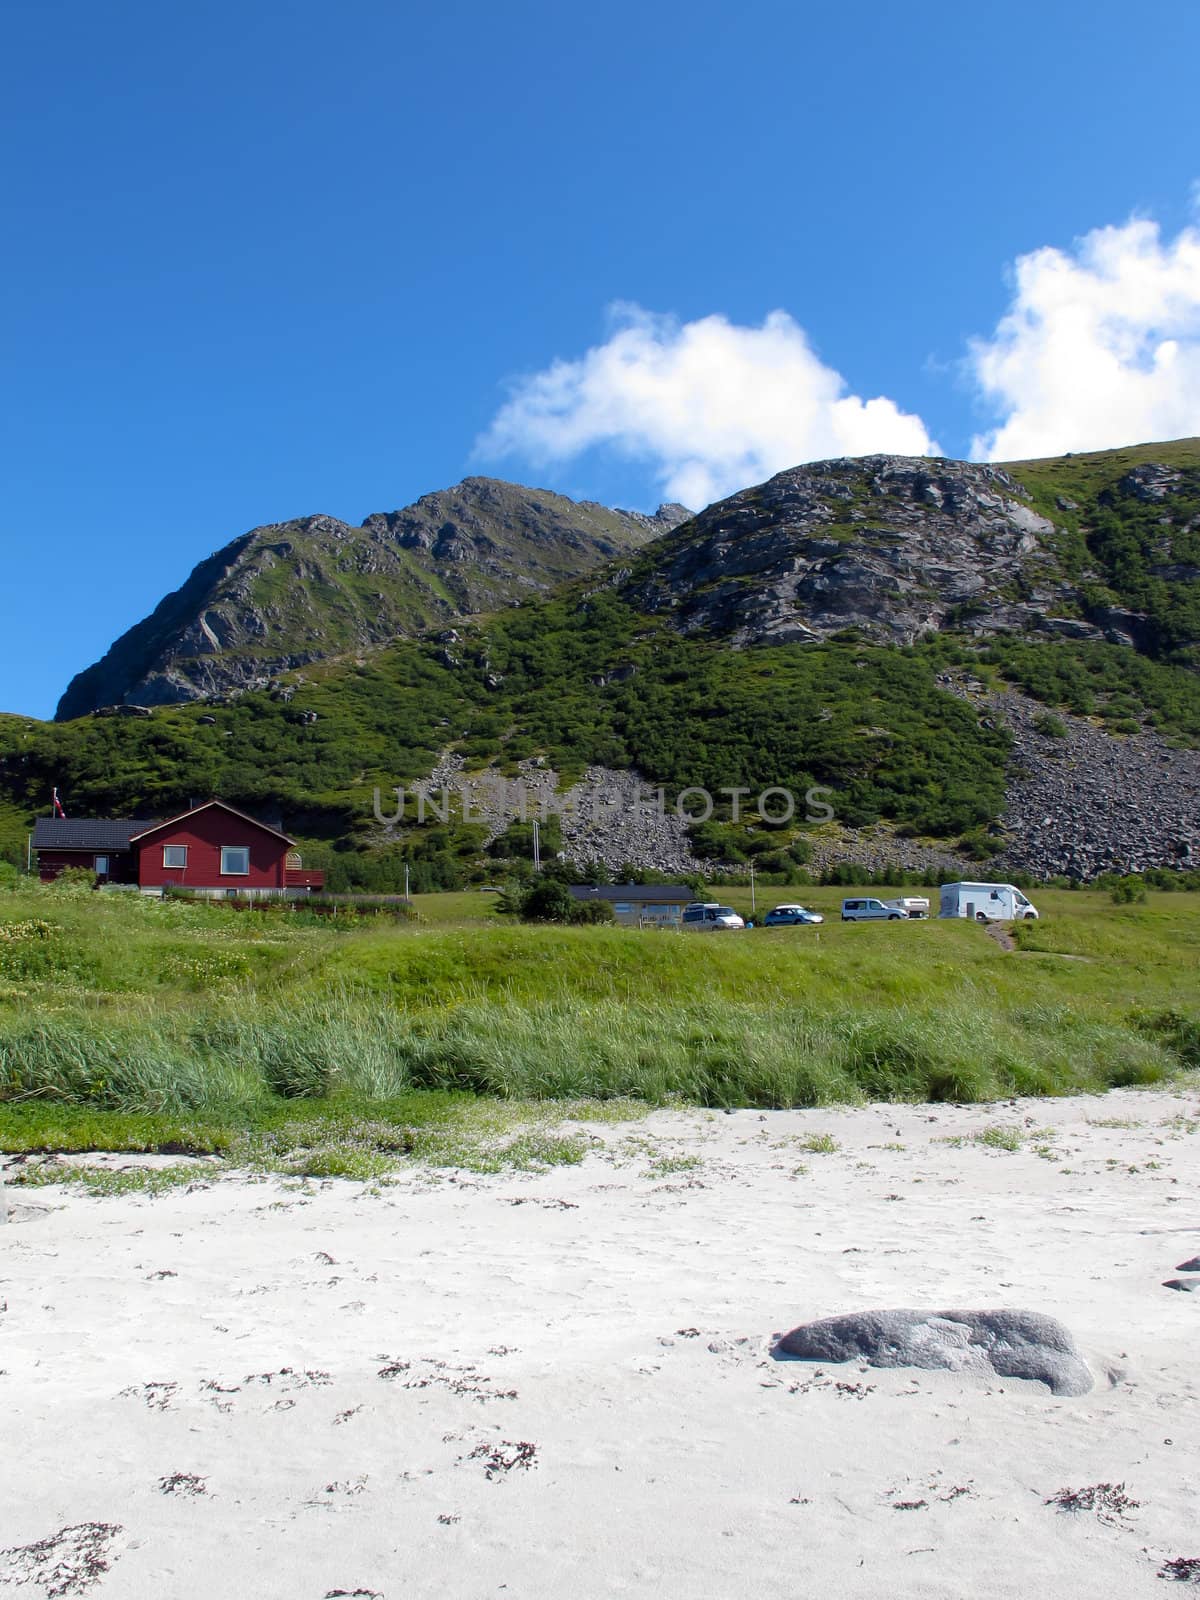 Picturesque landscape at Norway beach
